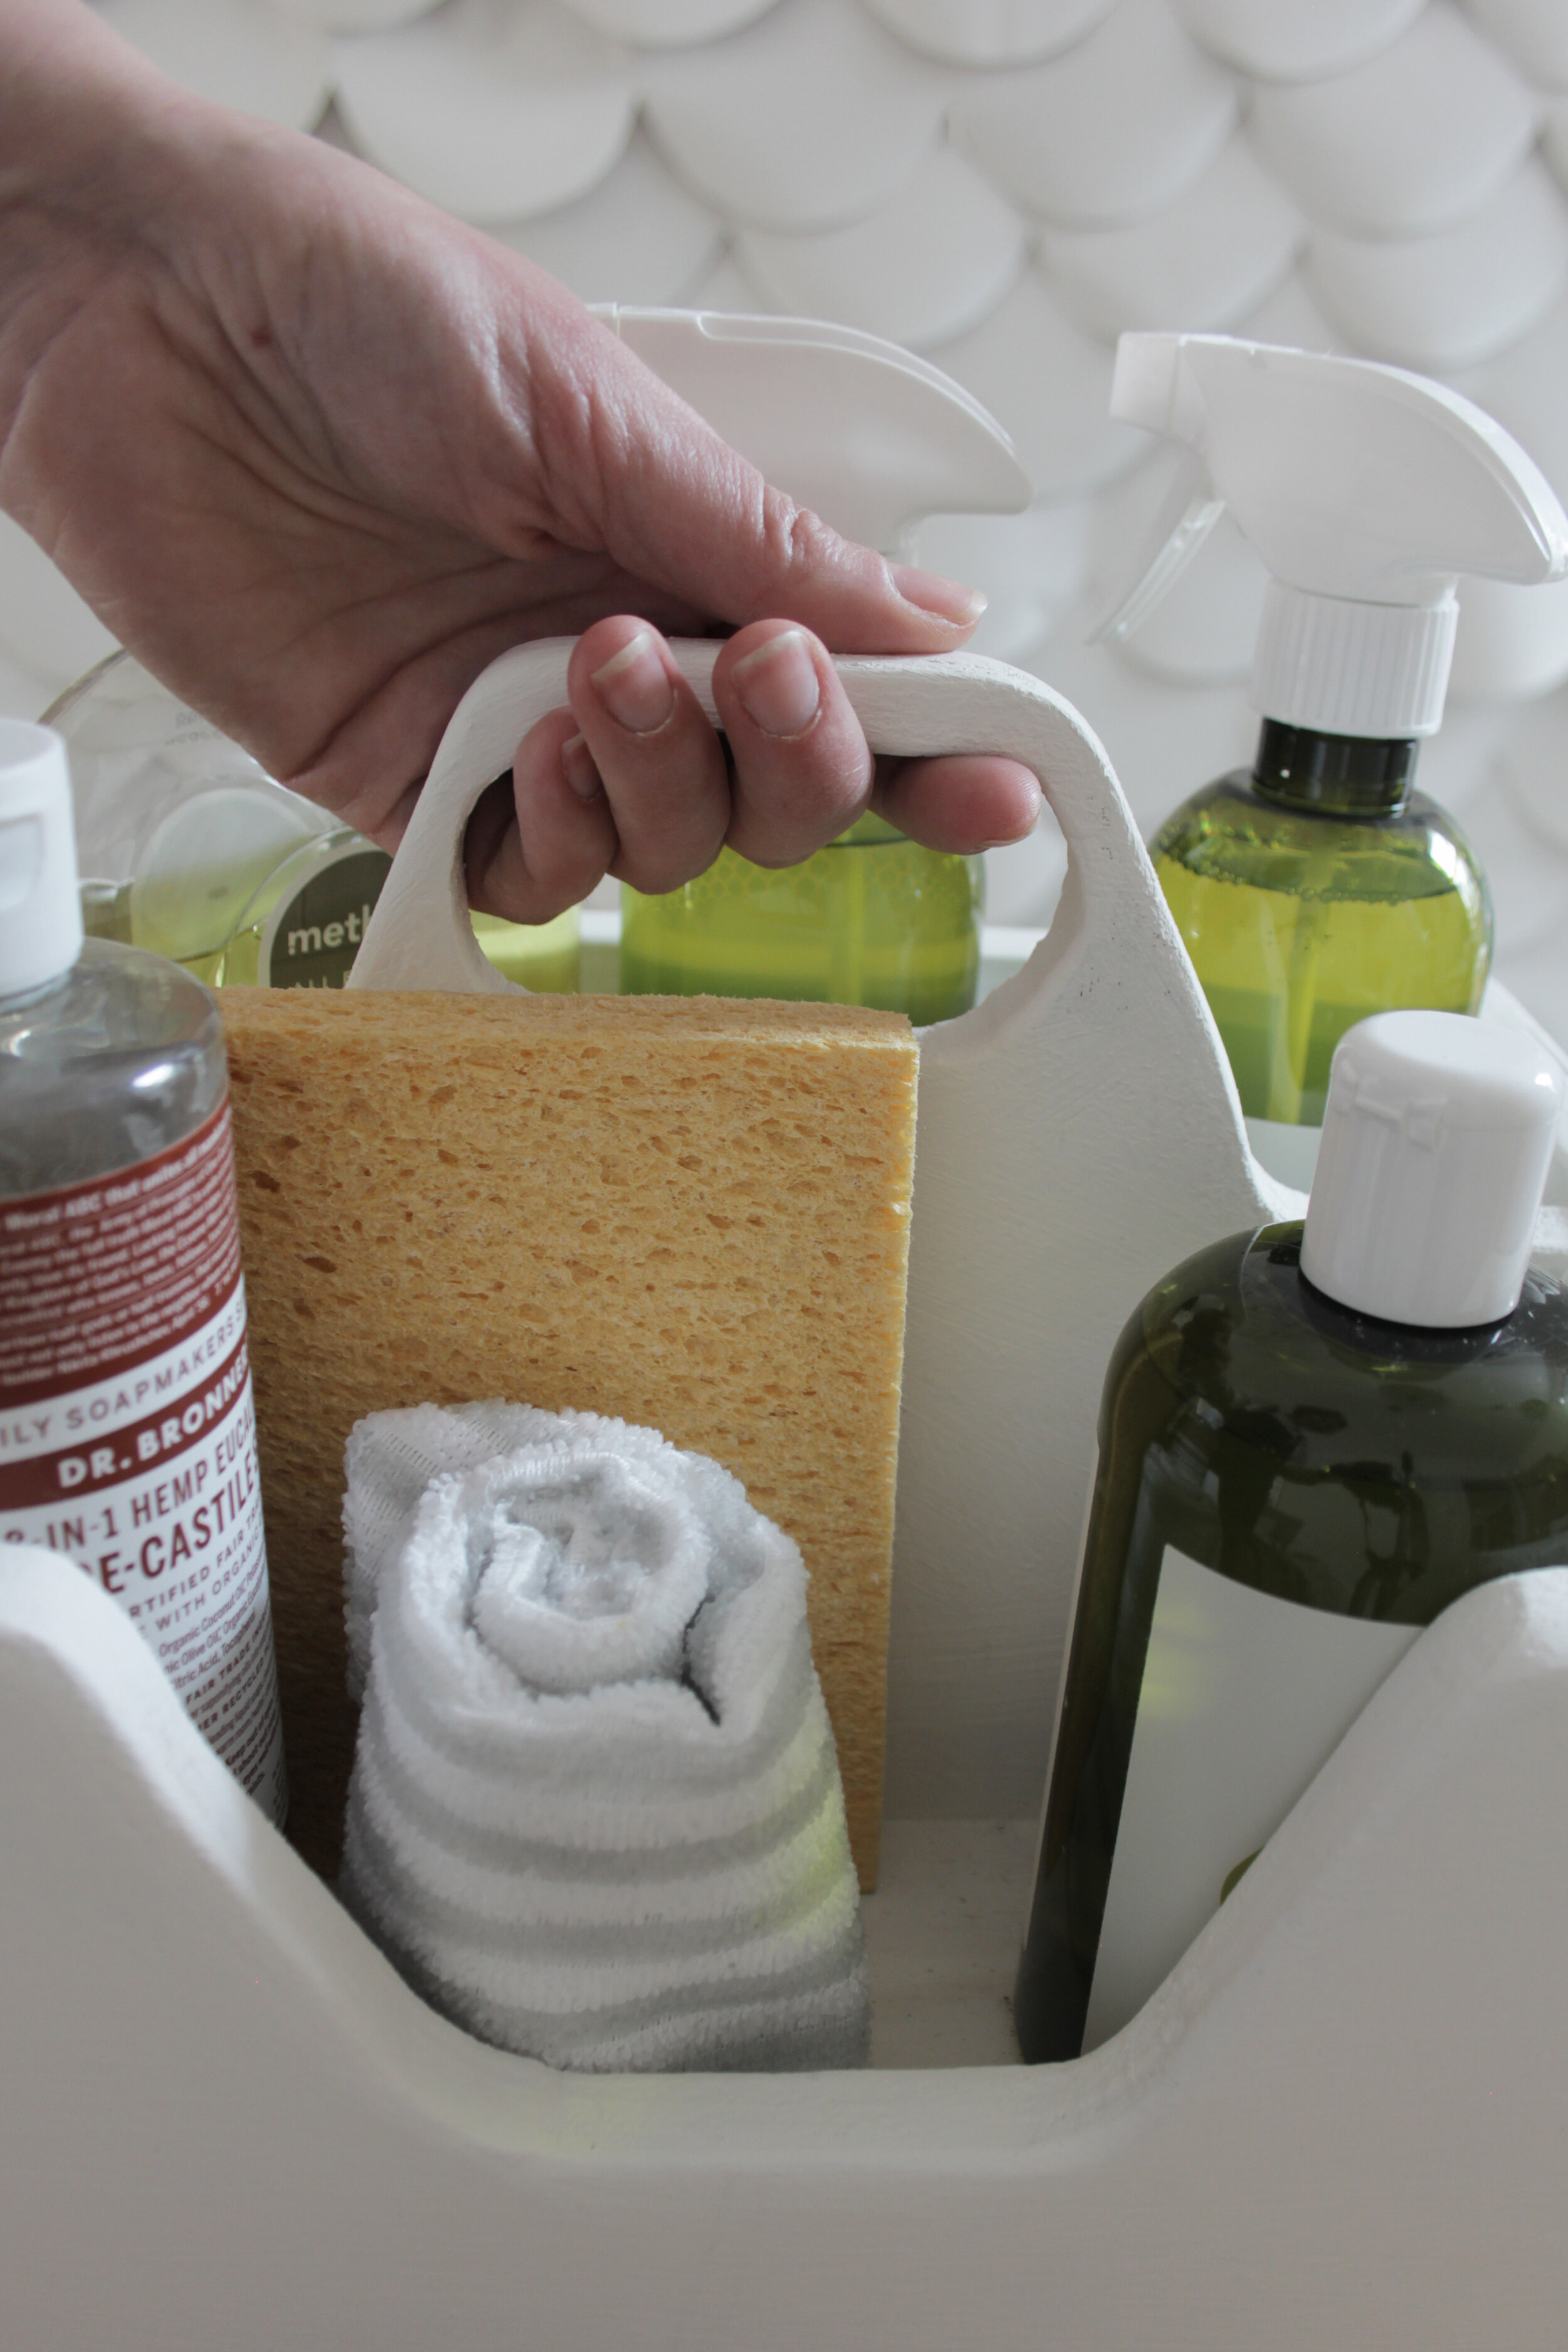 DIY Cleaning Caddy – Perfect for Spring Cleaning!